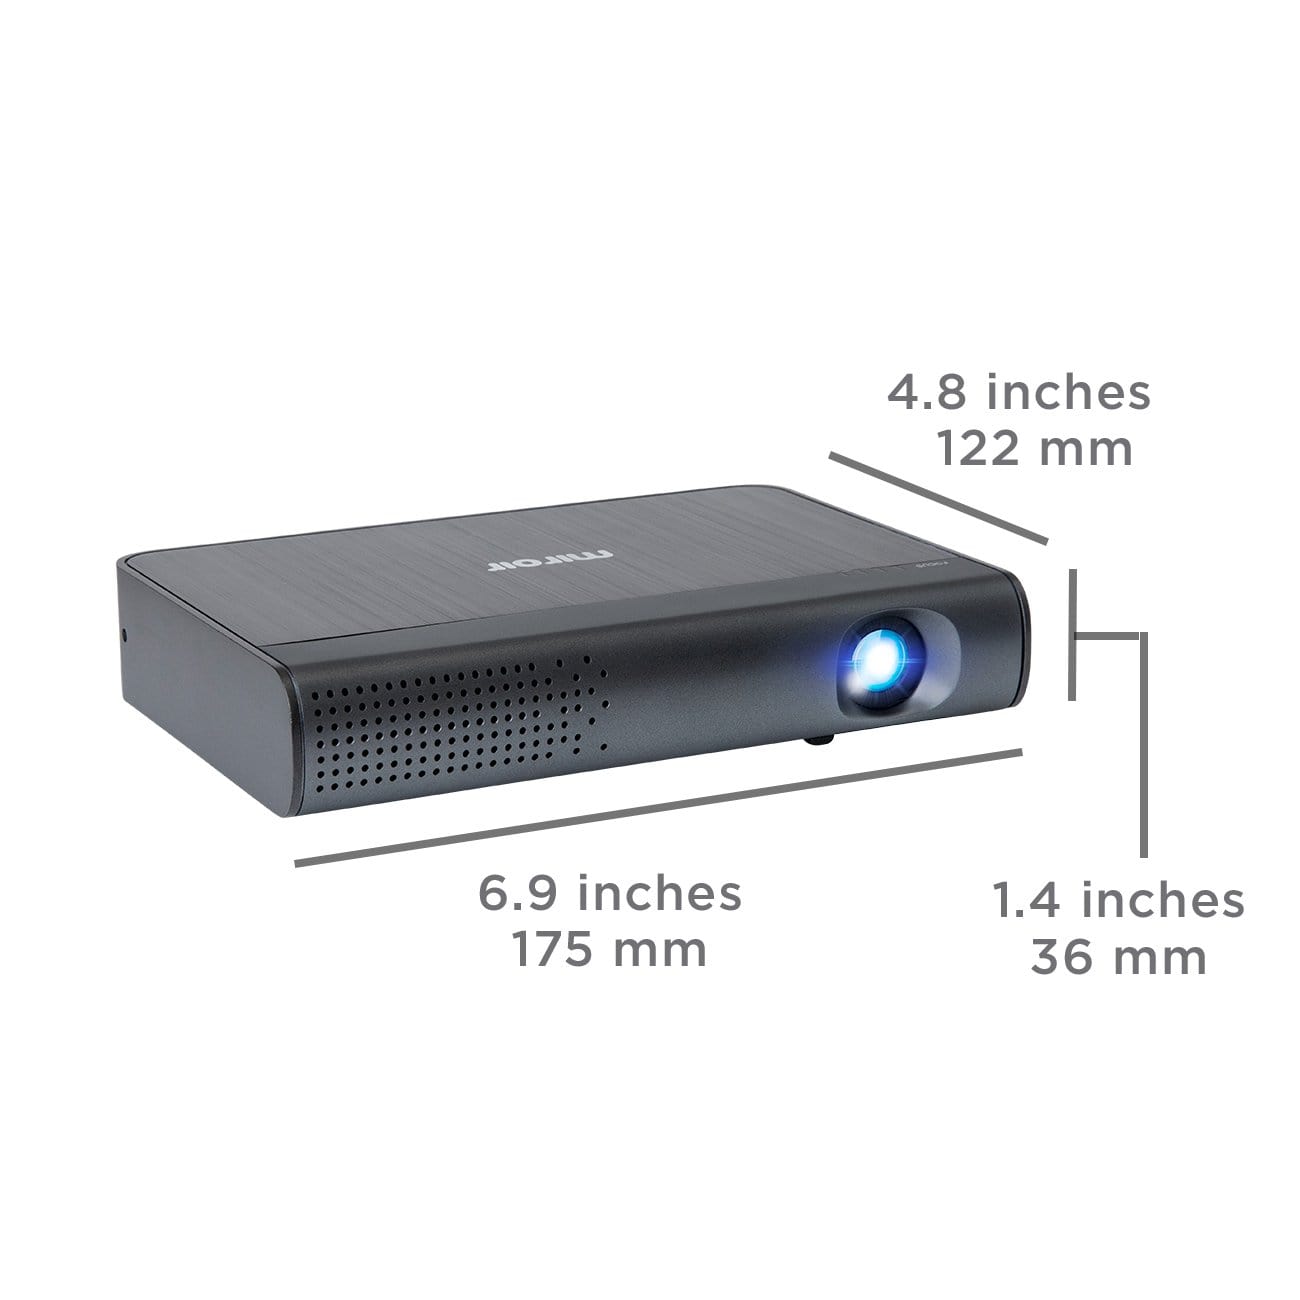 Miroir M289 1080p Mini Projector, Full HD Native Resolution, Battery-powered, USB Type C Charge and Video